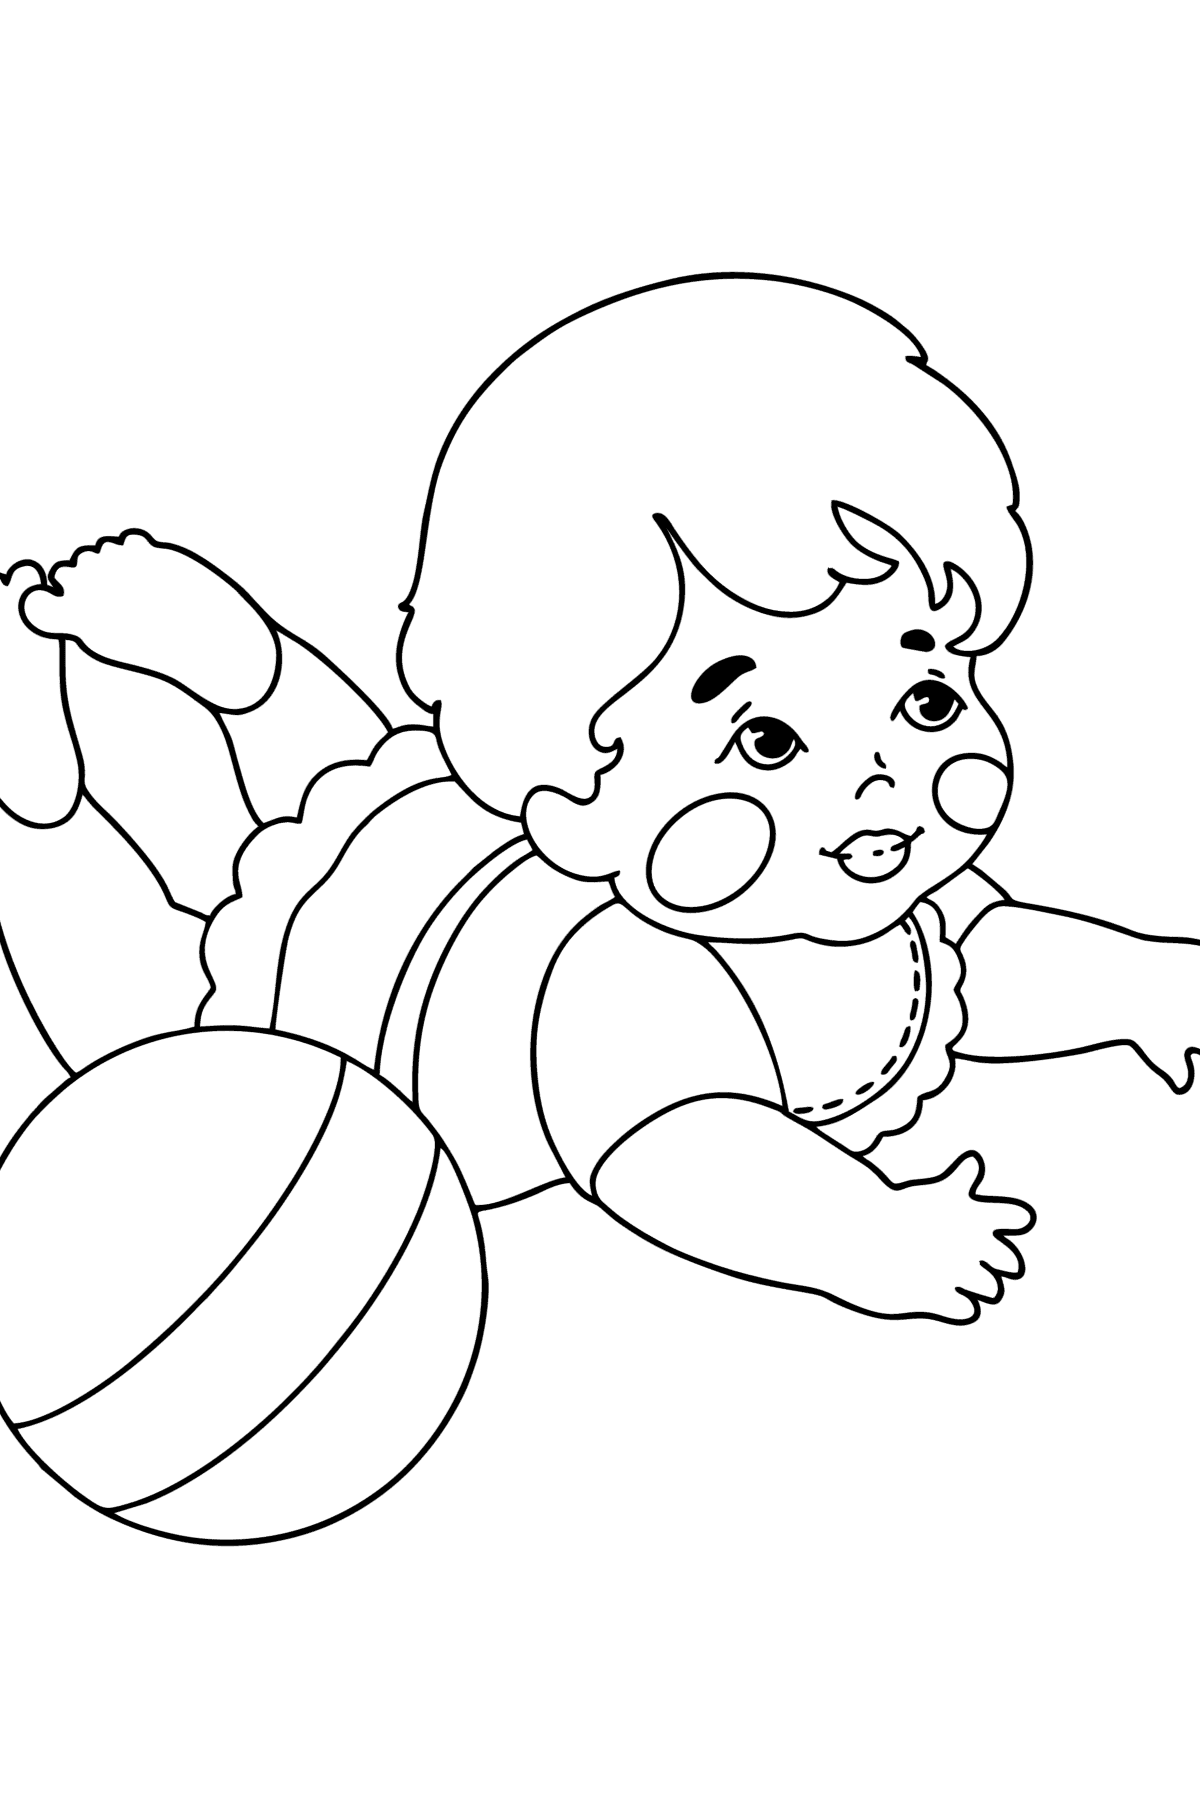 Baby with a ball сoloring page - Coloring Pages for Kids